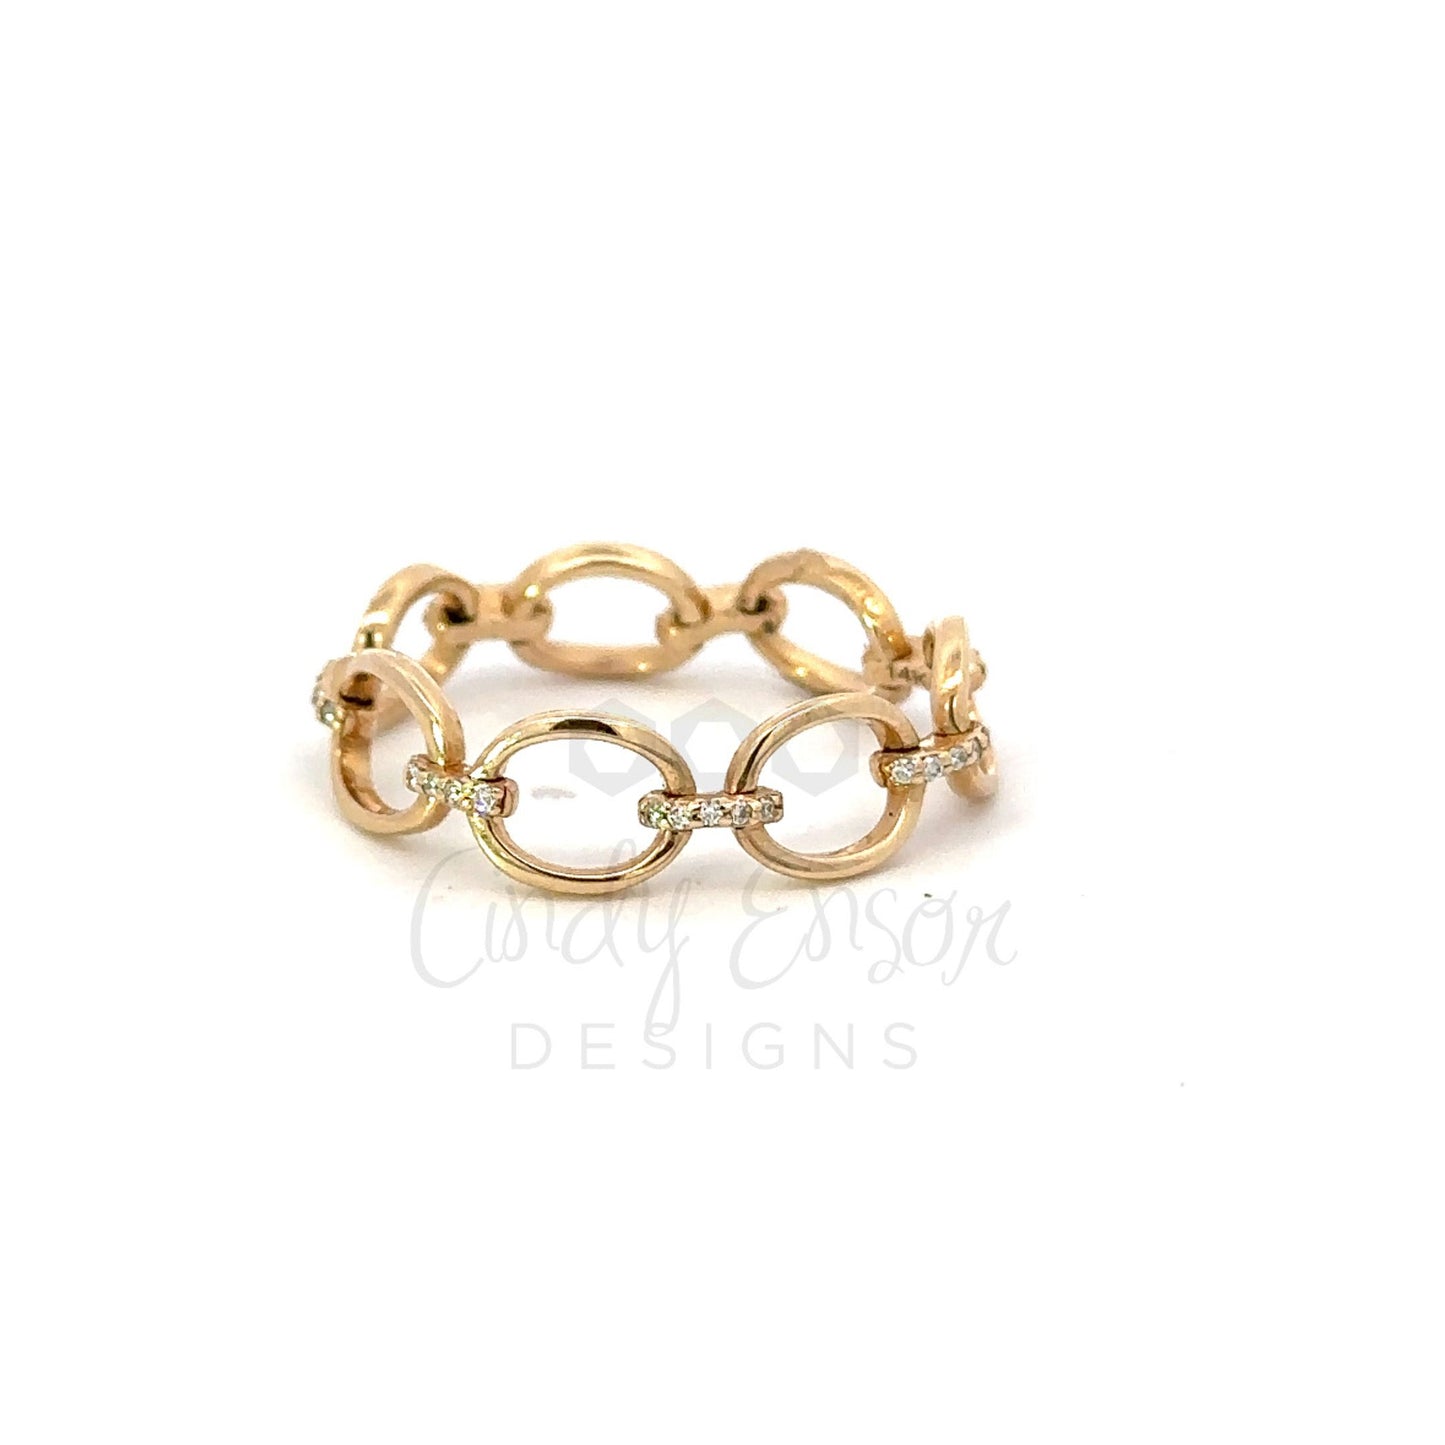 Flexible Chain Link Ring with Pave Diamond Accents